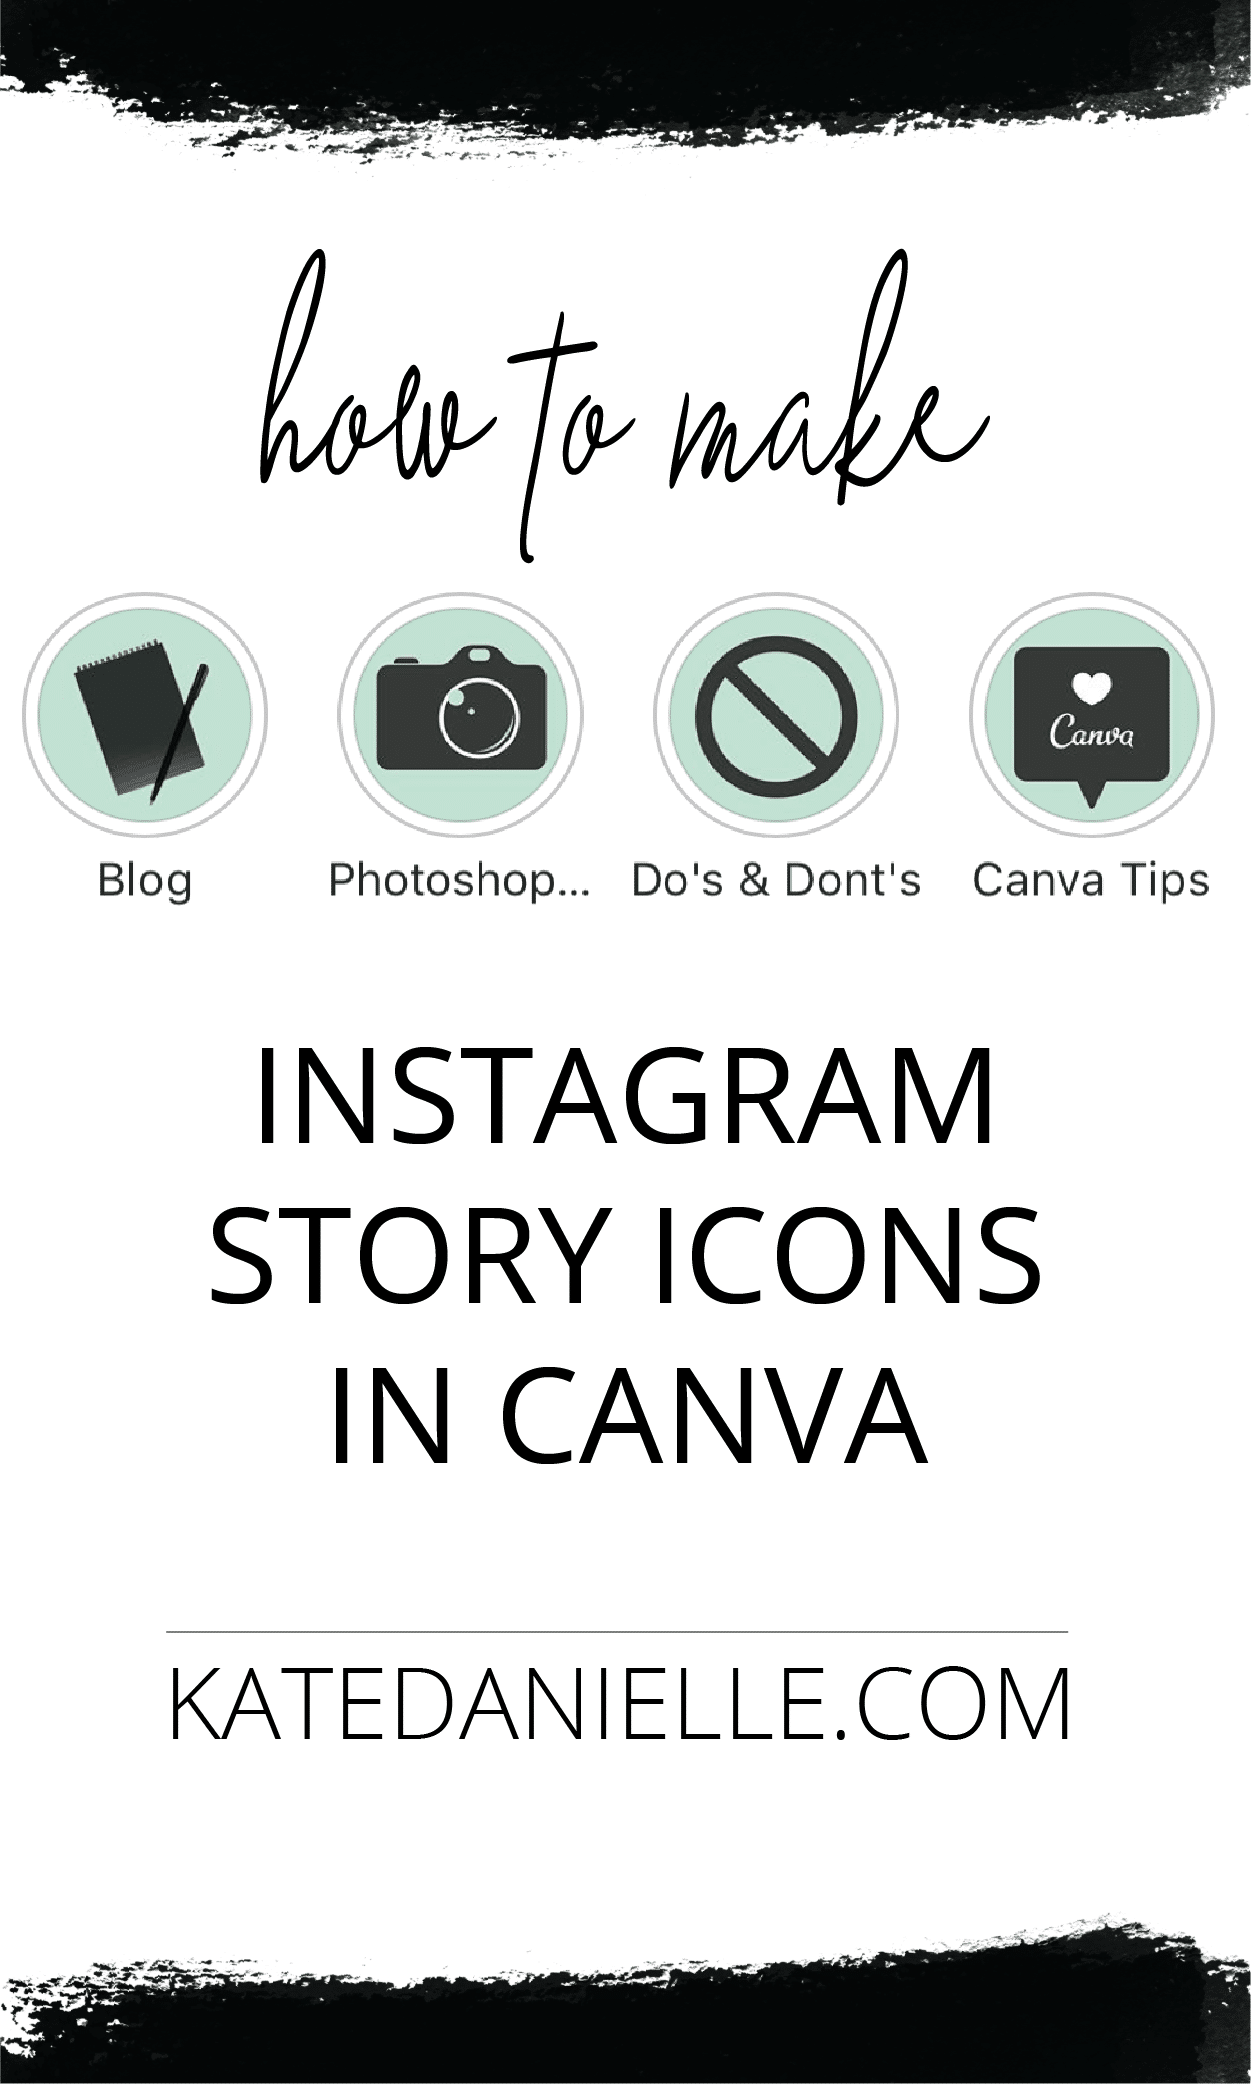 Design Instagram Story Icons In Canva Kate Danielle Creative